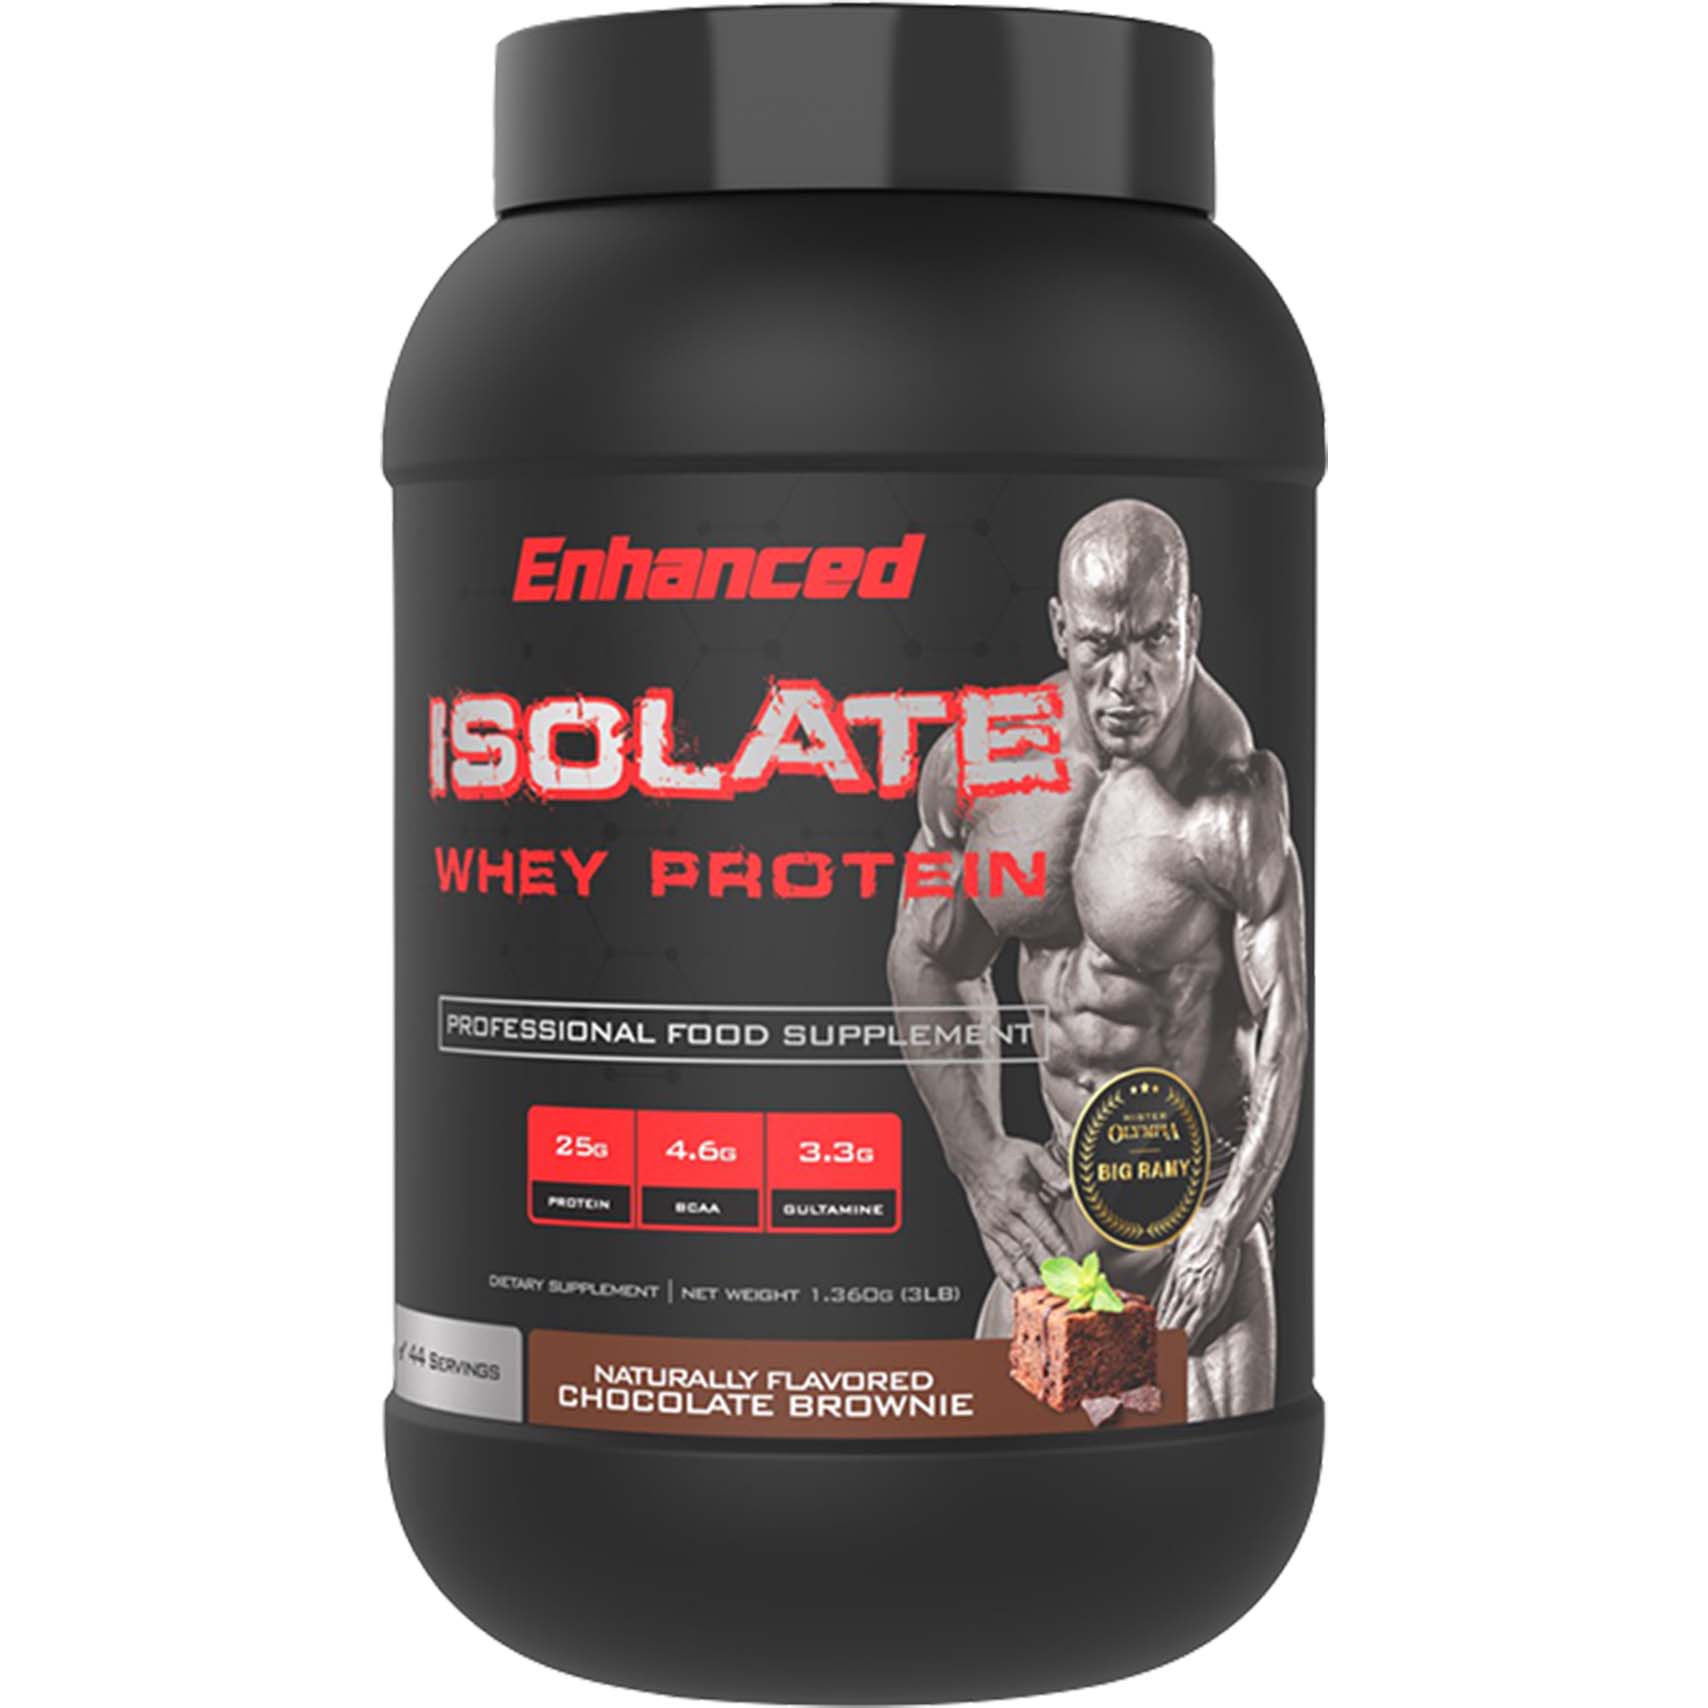 Enhanced Isolate Whey Protein, Chocolate Brownie, 3 LB